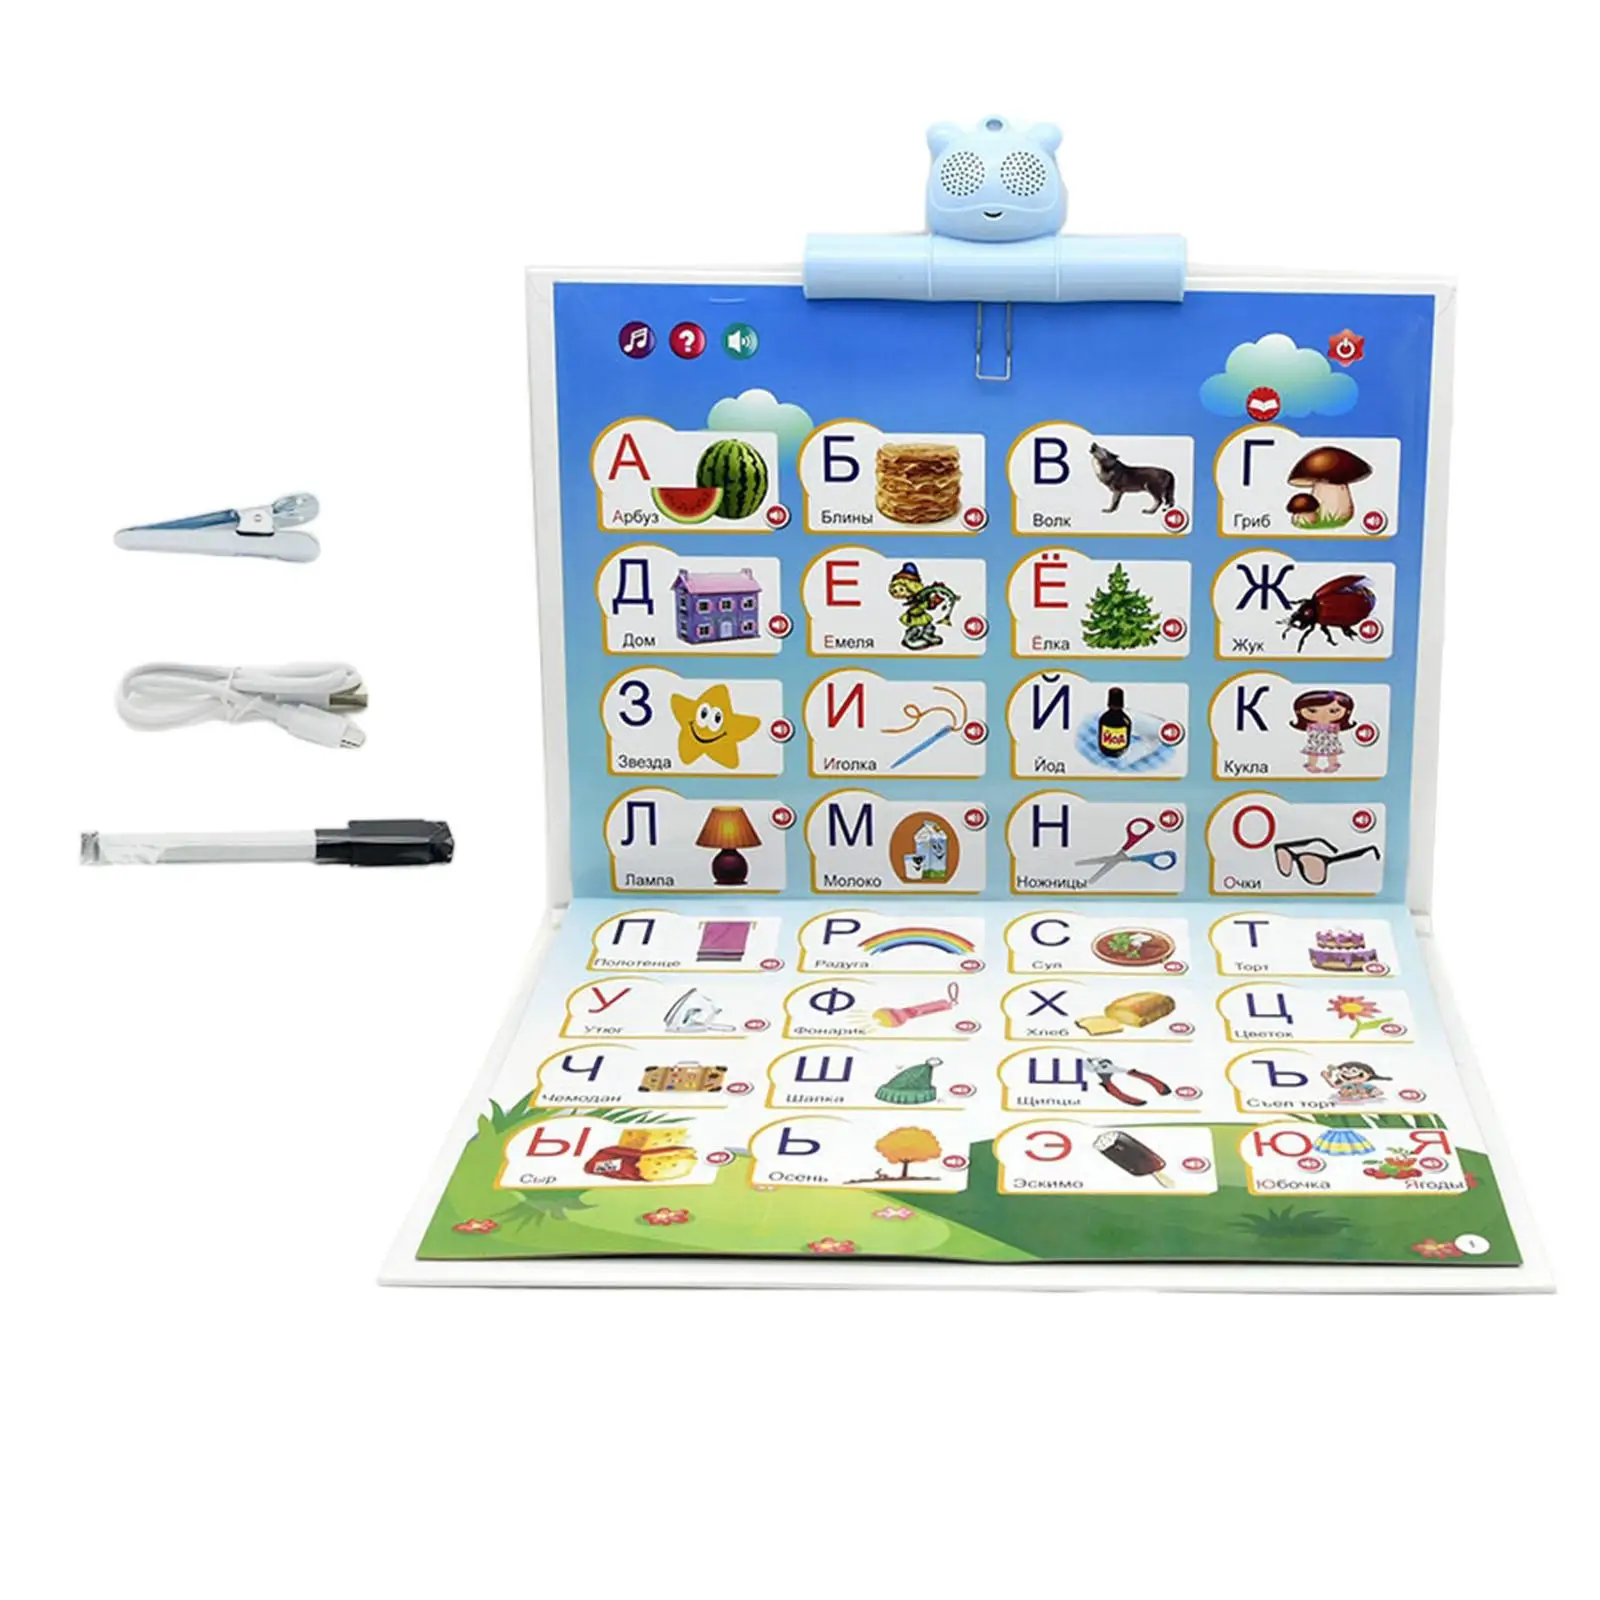 Hanging Russian Learning Machine Toys Study Game for Preschool Children